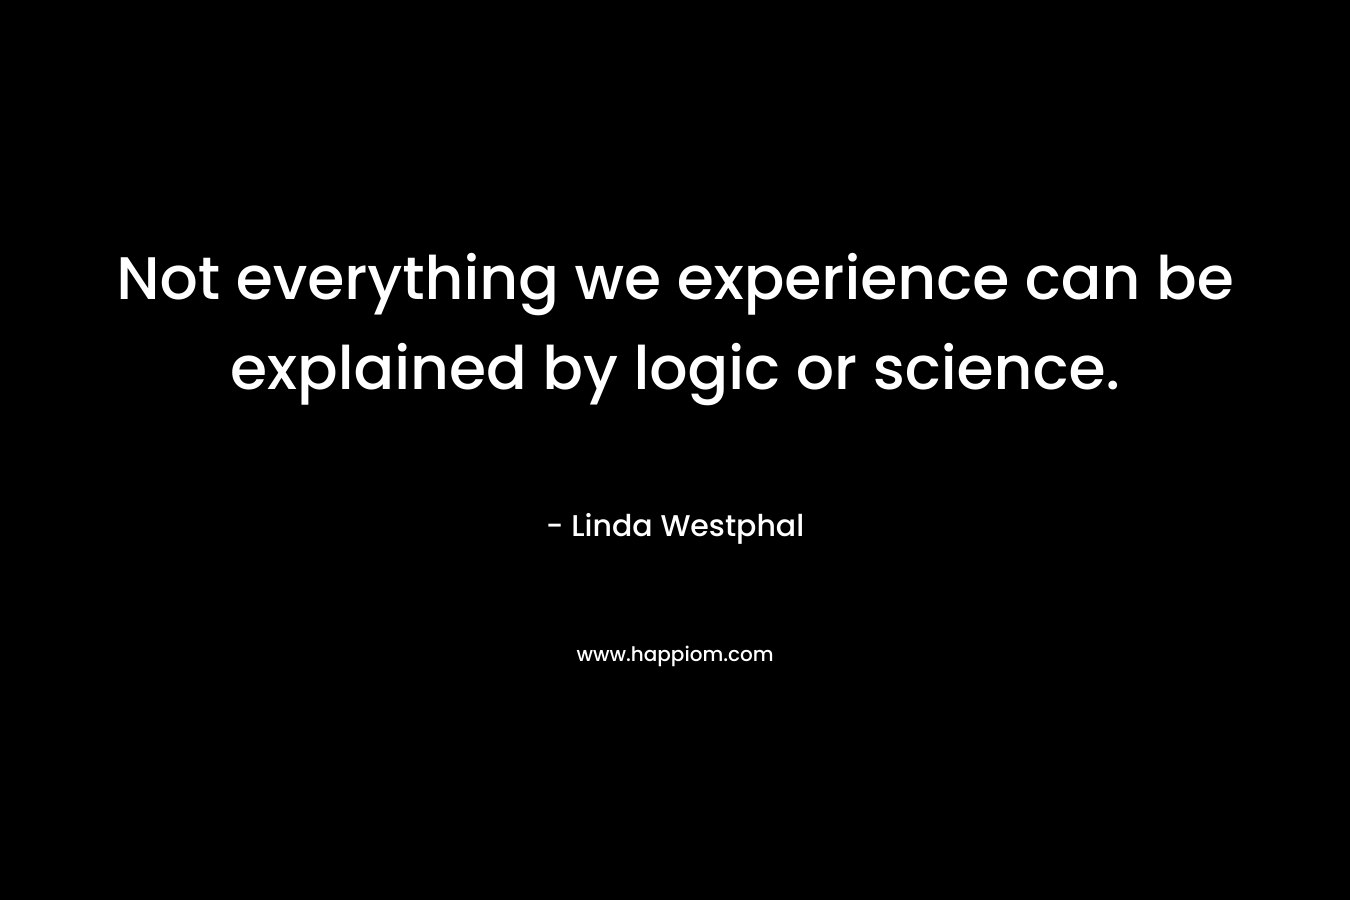 Not everything we experience can be explained by logic or science.